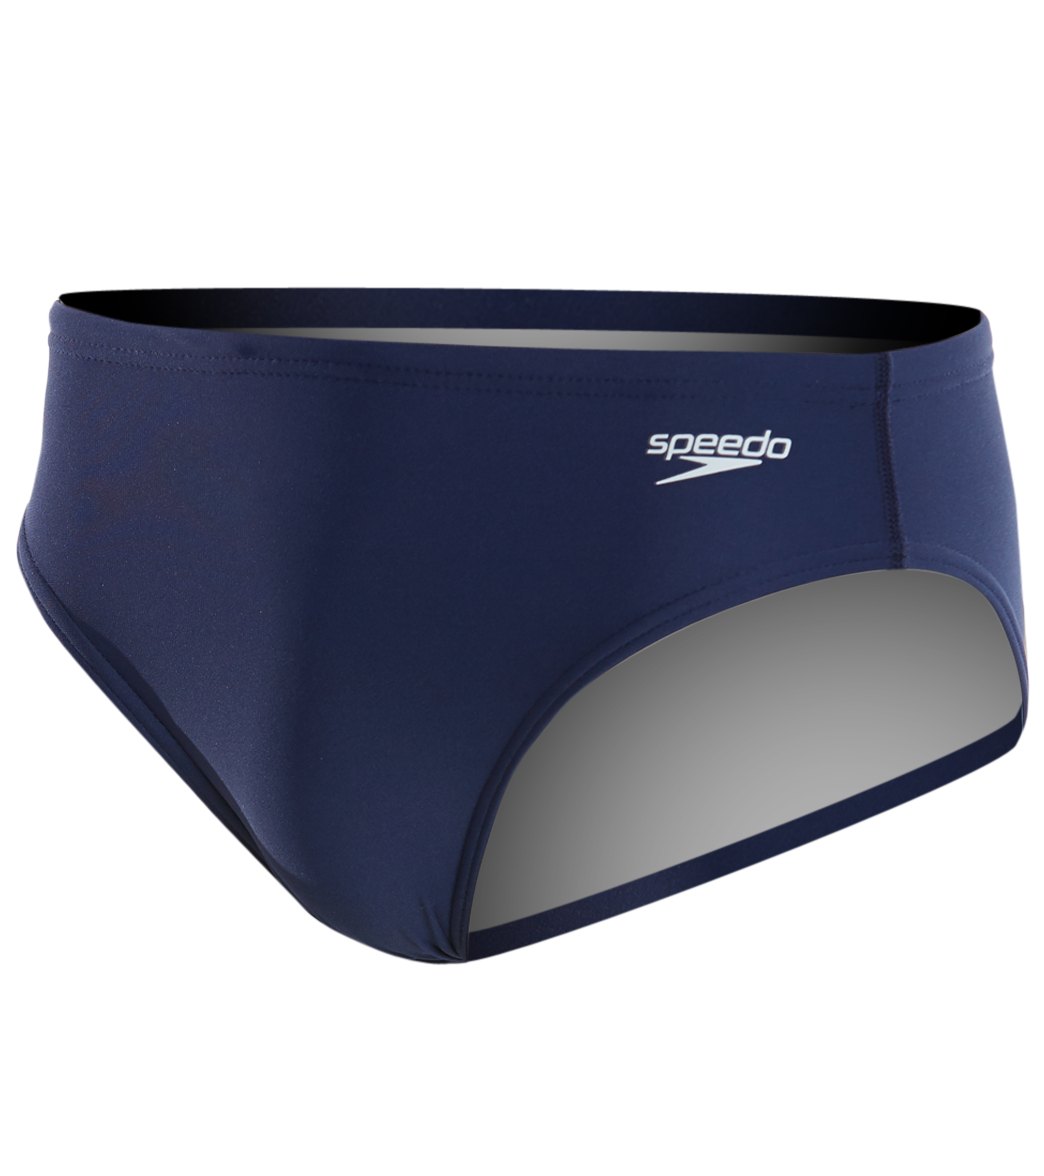 Speedo The One Mens Brief Swimsuit at SwimOutlet